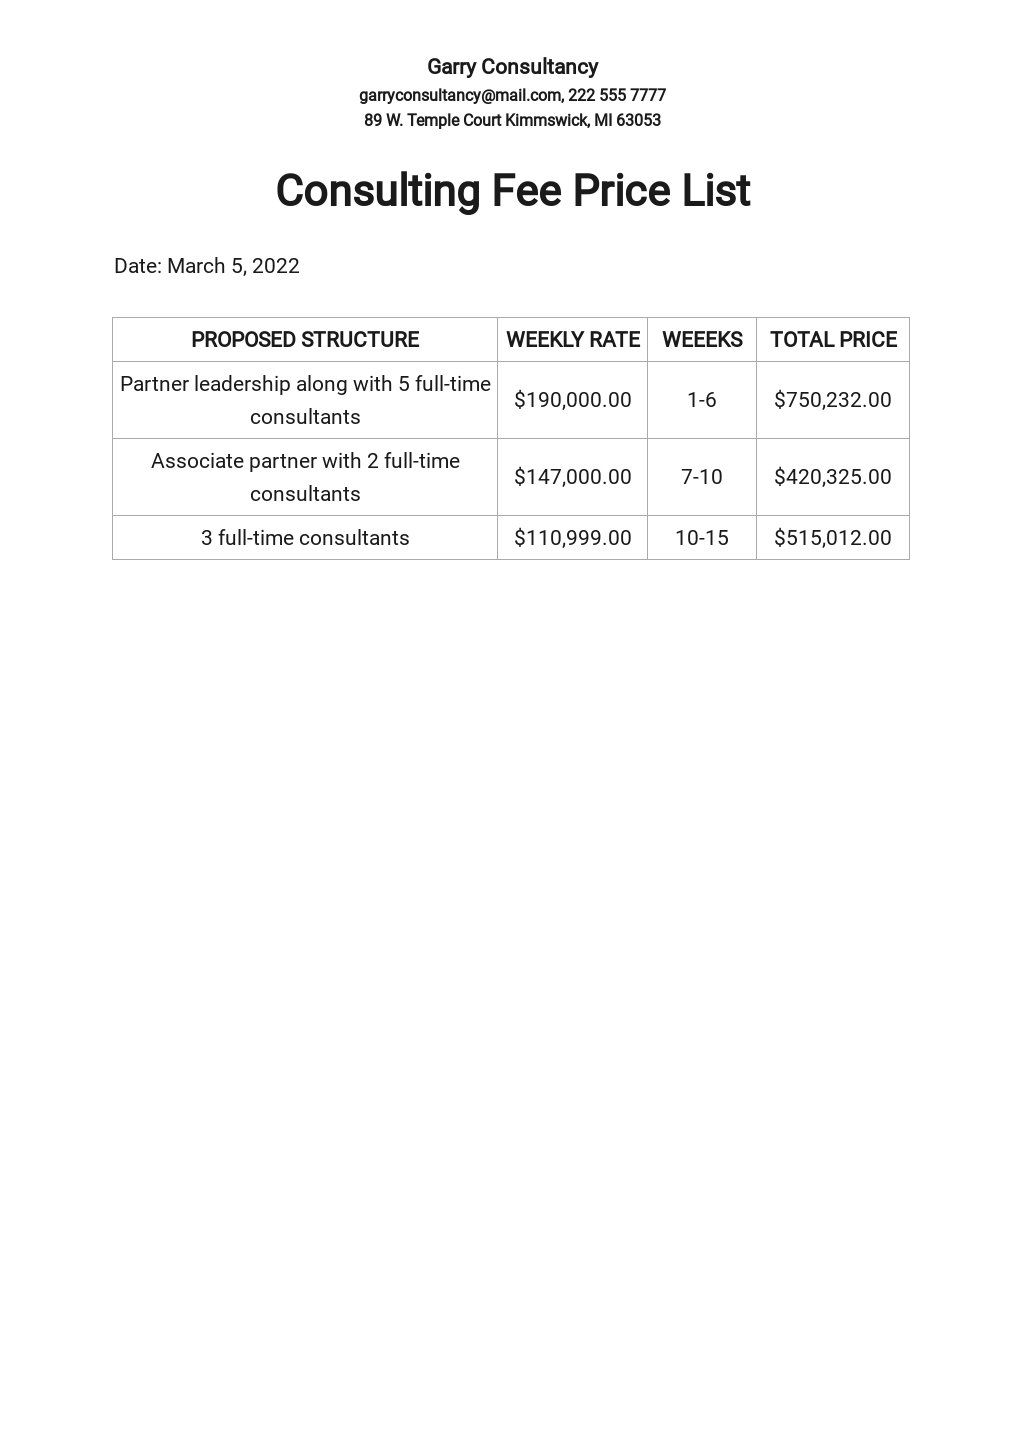 Consulting Fee Price List Template [Free PDF] - Google Docs, Word